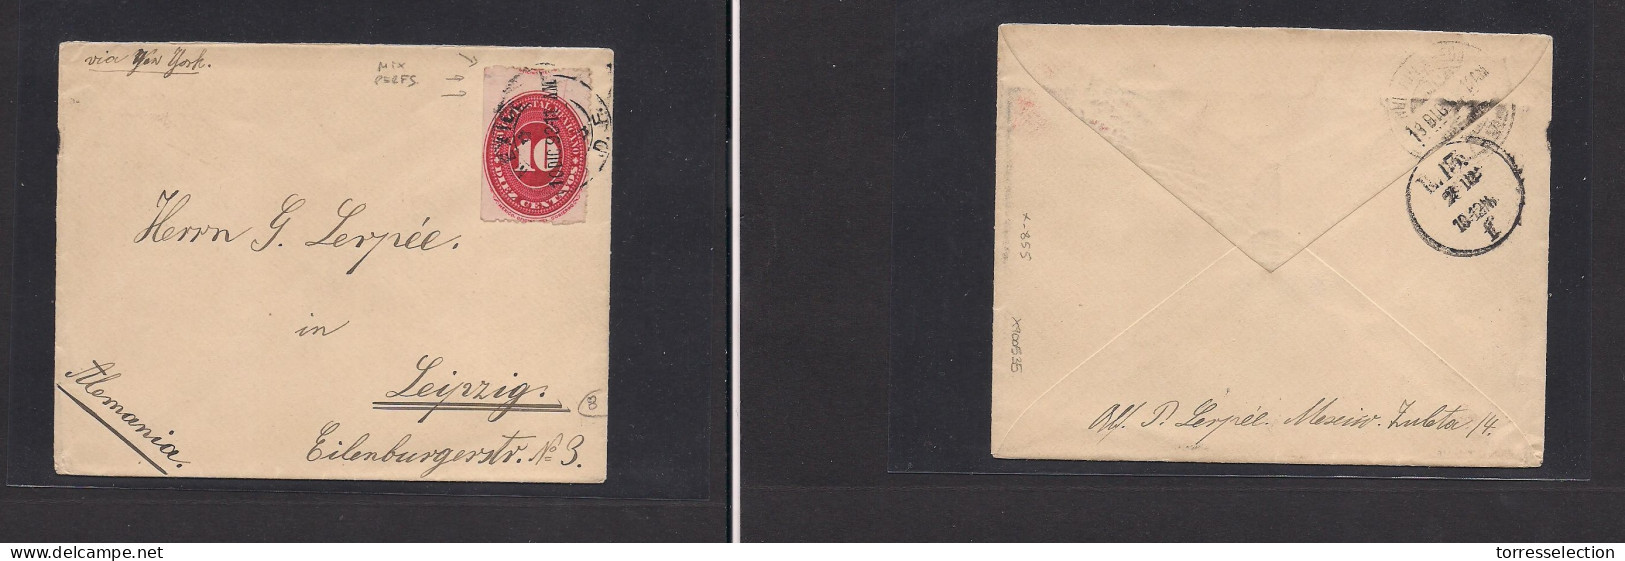 MEXICO. Mexico - Cover - 1893 DF To Lepizig  Germany Frkd Env Lare Numeral Prforation Varietty, Interesting And Rare. Ea - Mexico